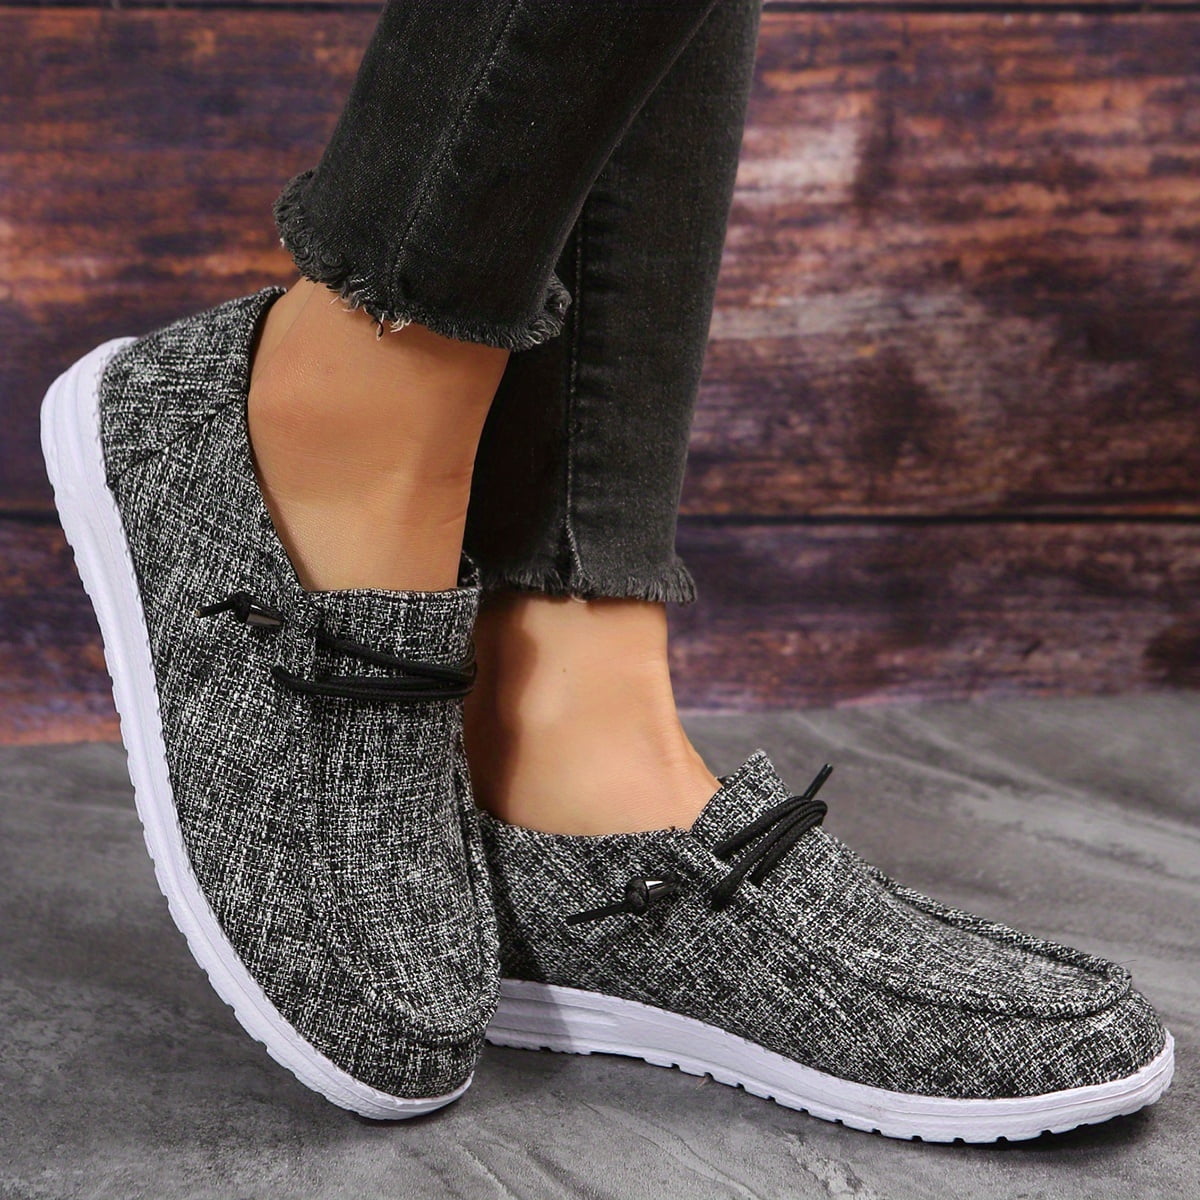 Comfy Women's Canvas Sneakers casual shoes- Lightweight, Low Top, Lace ...